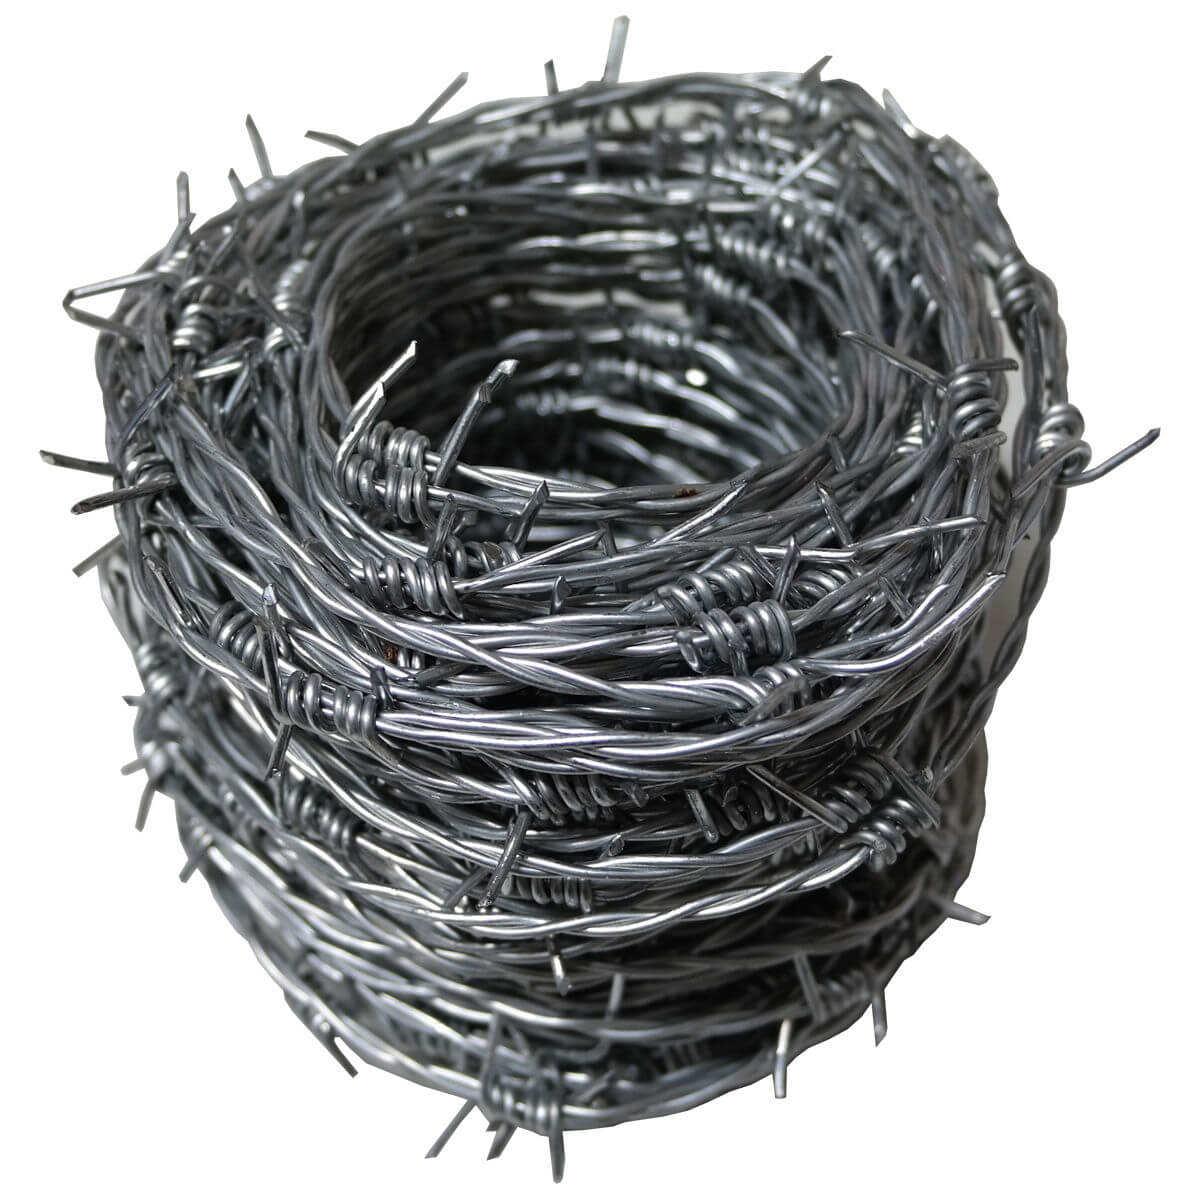 Barbed wire: An essential tool for emergency preparedness